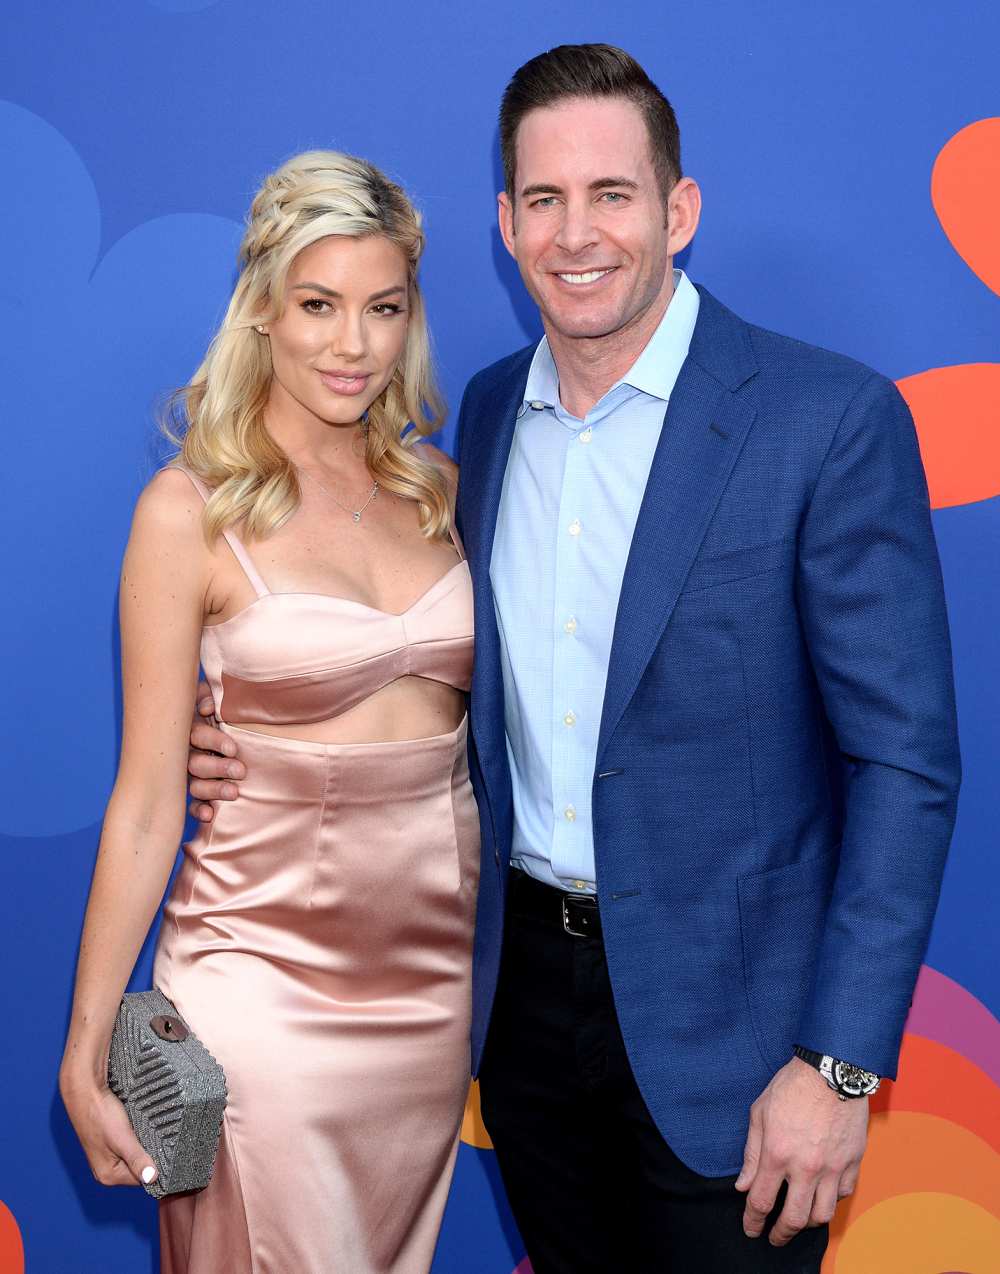 Heather Rae Young Slams Troll Who Says Husband Tarek El Moussa Is Her 'Entire Personality': 'It's Called True Love'